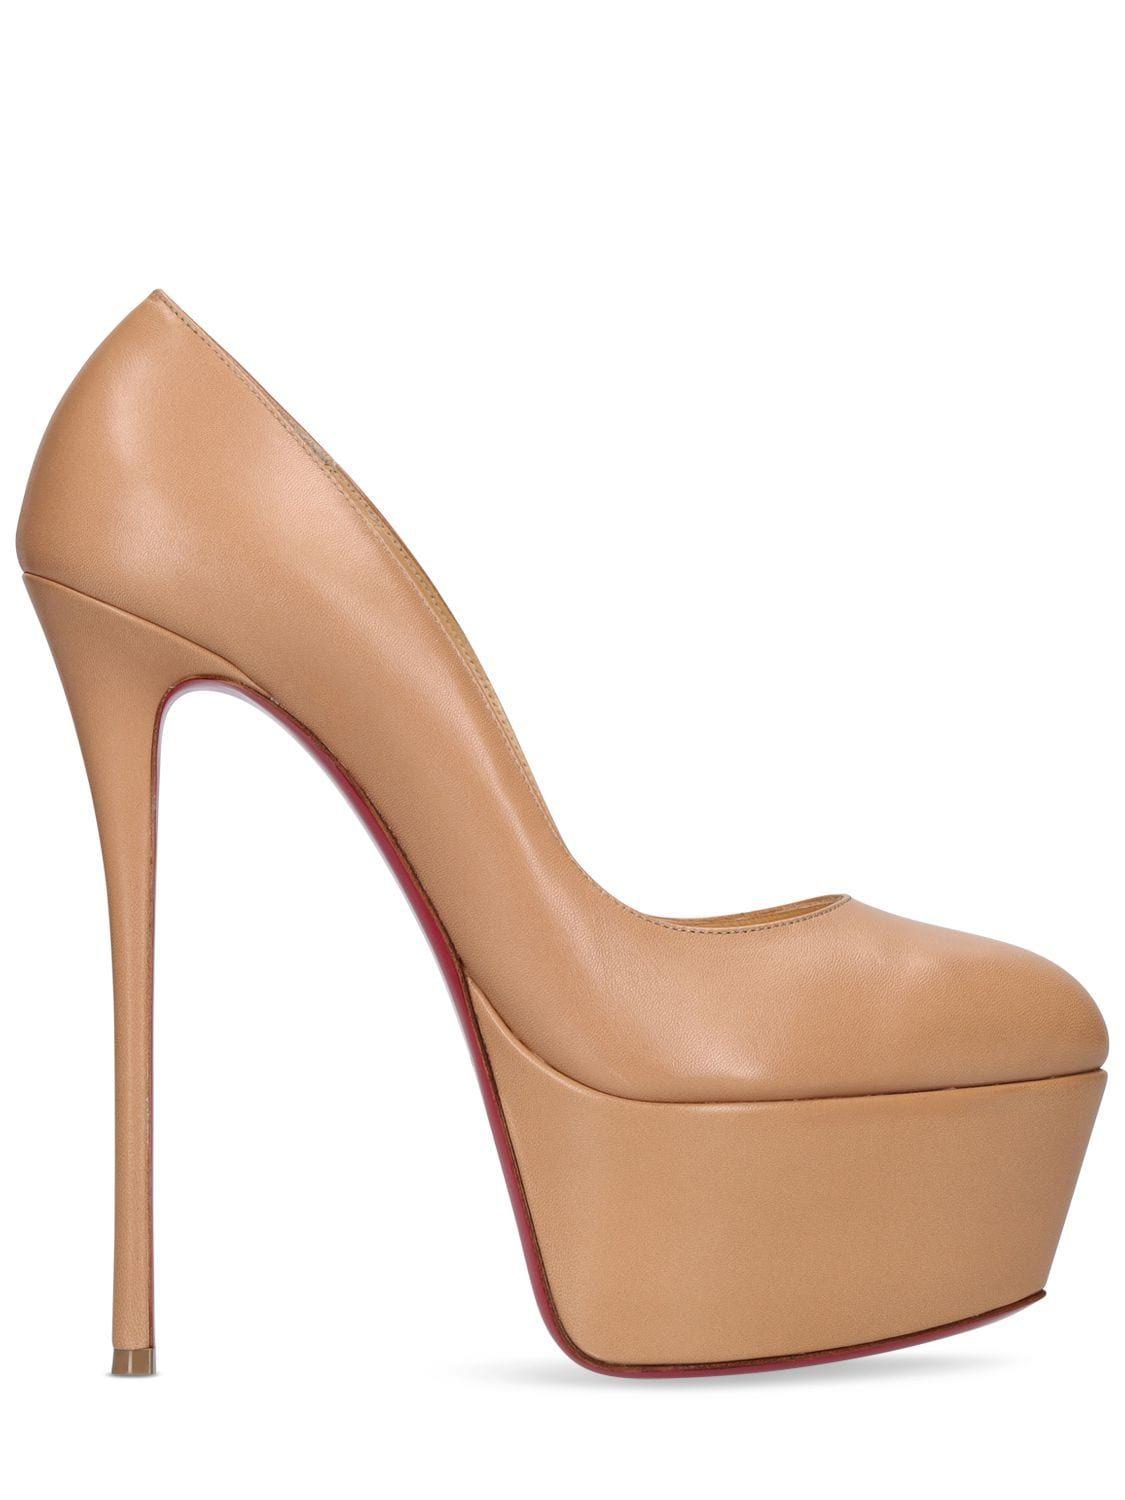 Christian Louboutin Dolly 160 Leather Pumps